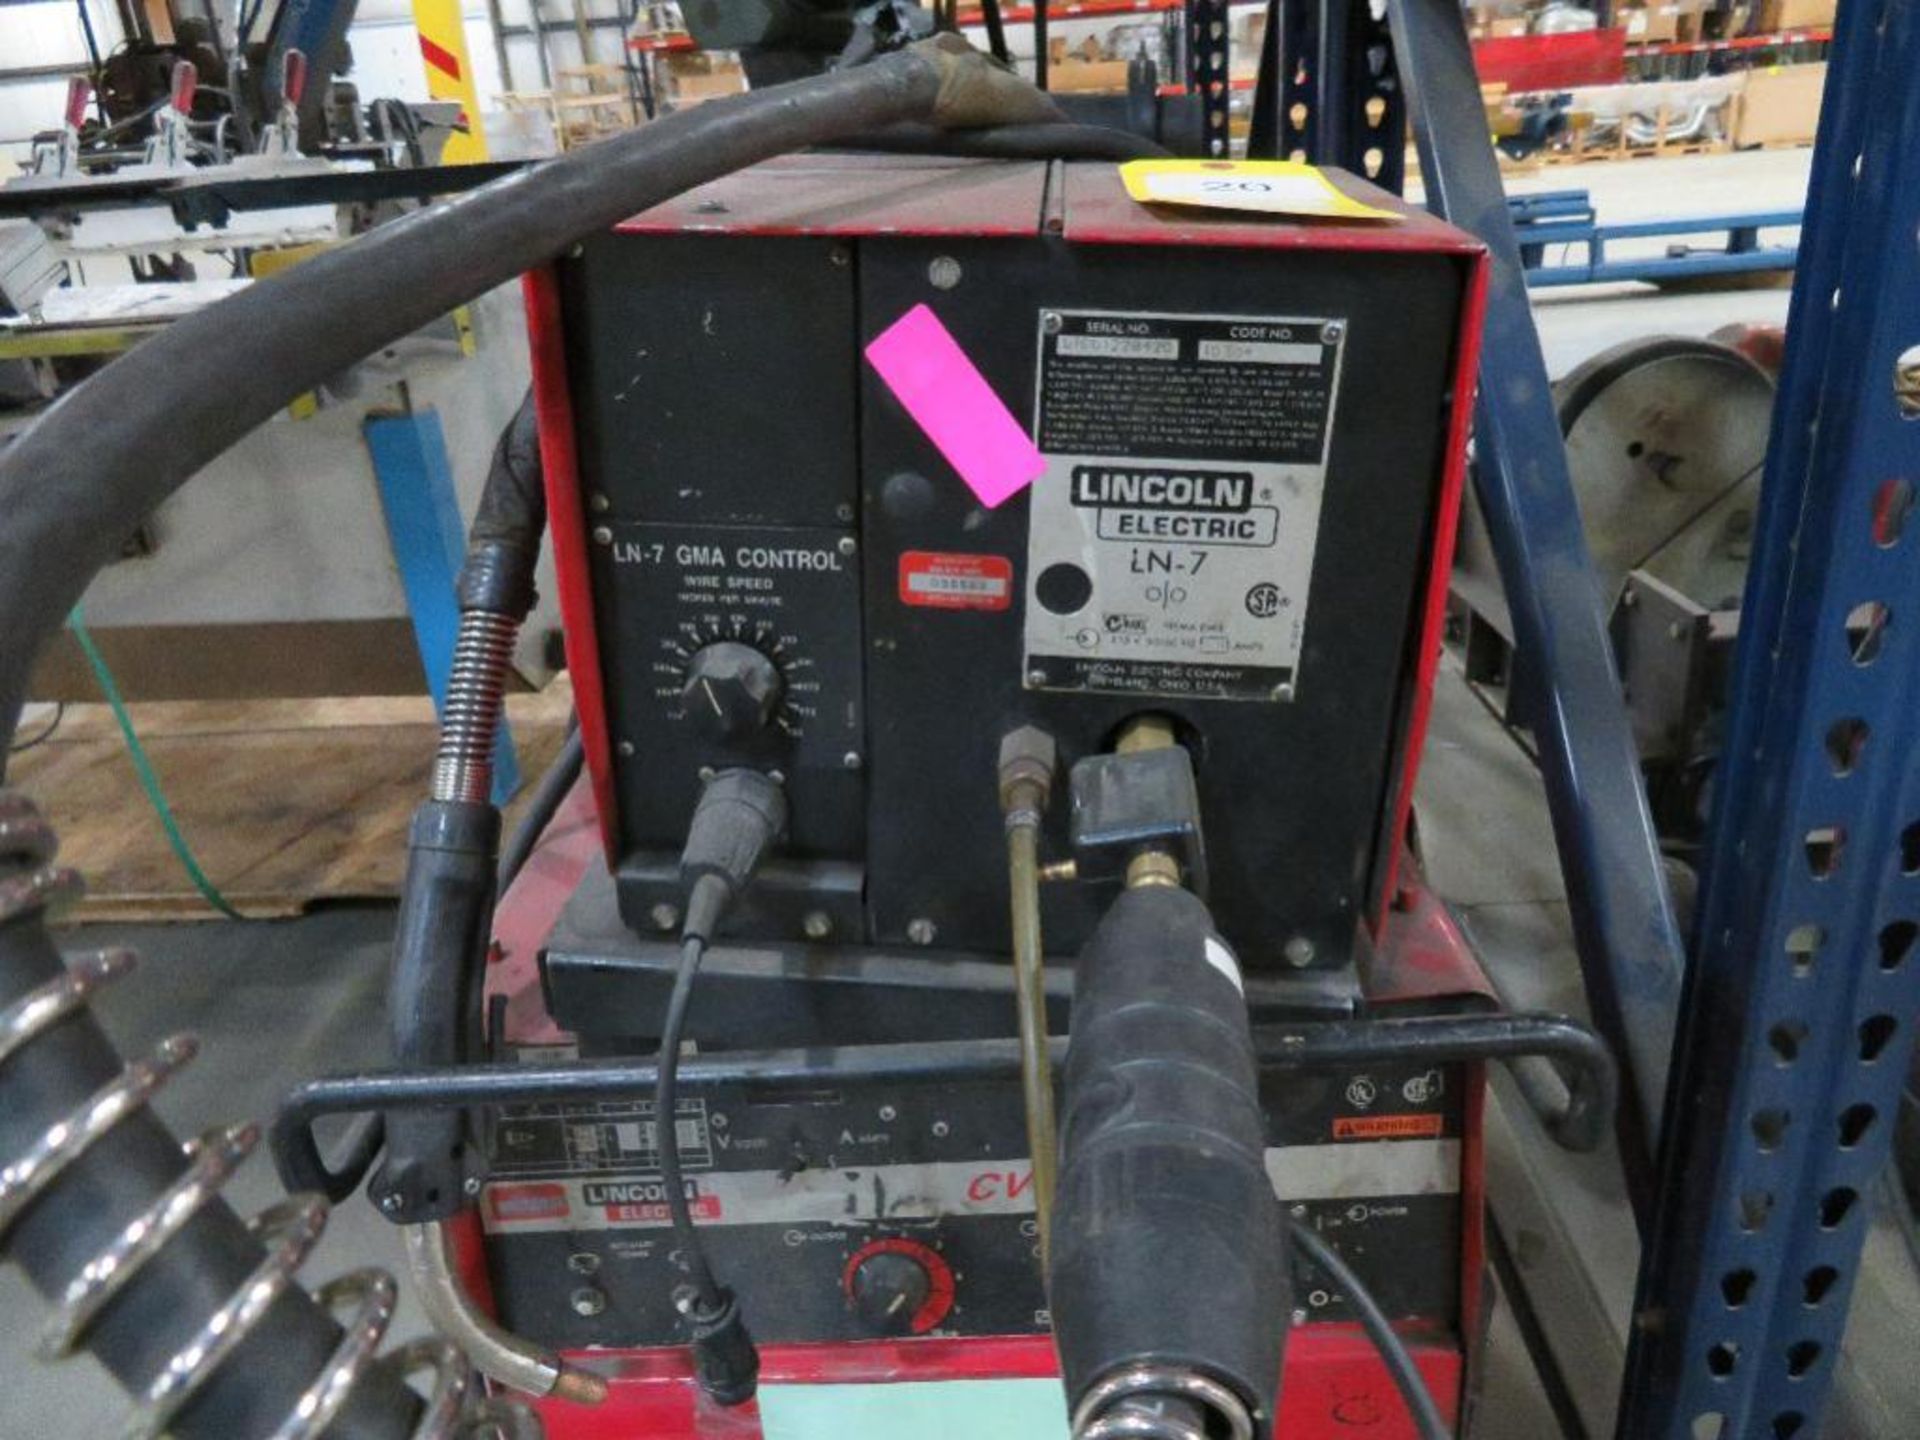 Lincoln 300 Amp Electric MIG Welder Model CV-300, S/N U1000623492, with Lincoln LN-7 Wire Feed - Image 2 of 2